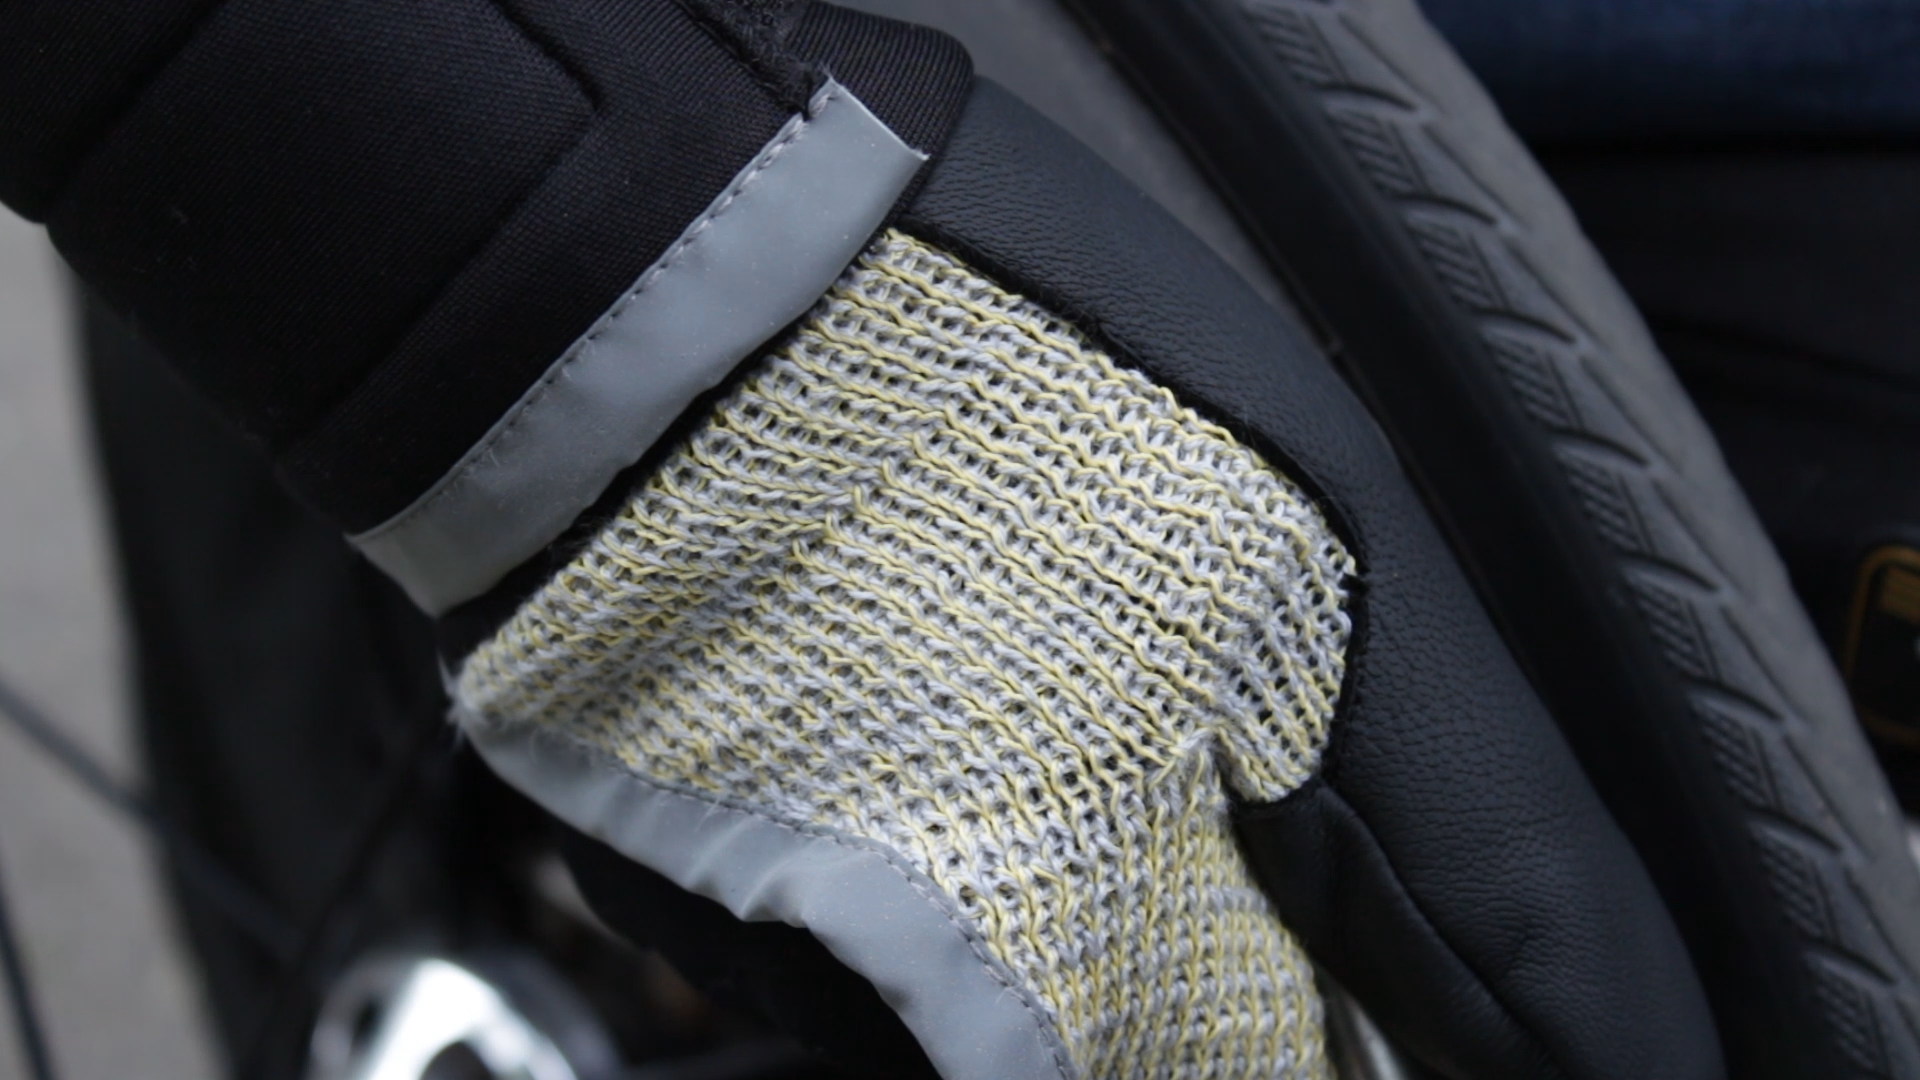 Photo with a detailed view of the glove. The hand wearing it is holding on the wheel of a wheelchair. The glove is knitted with yellow kevlar and grey cotton. the seams have a grey reflective fabric, and on the thumb there is a black leather reinforcement sewn on top of the knit.